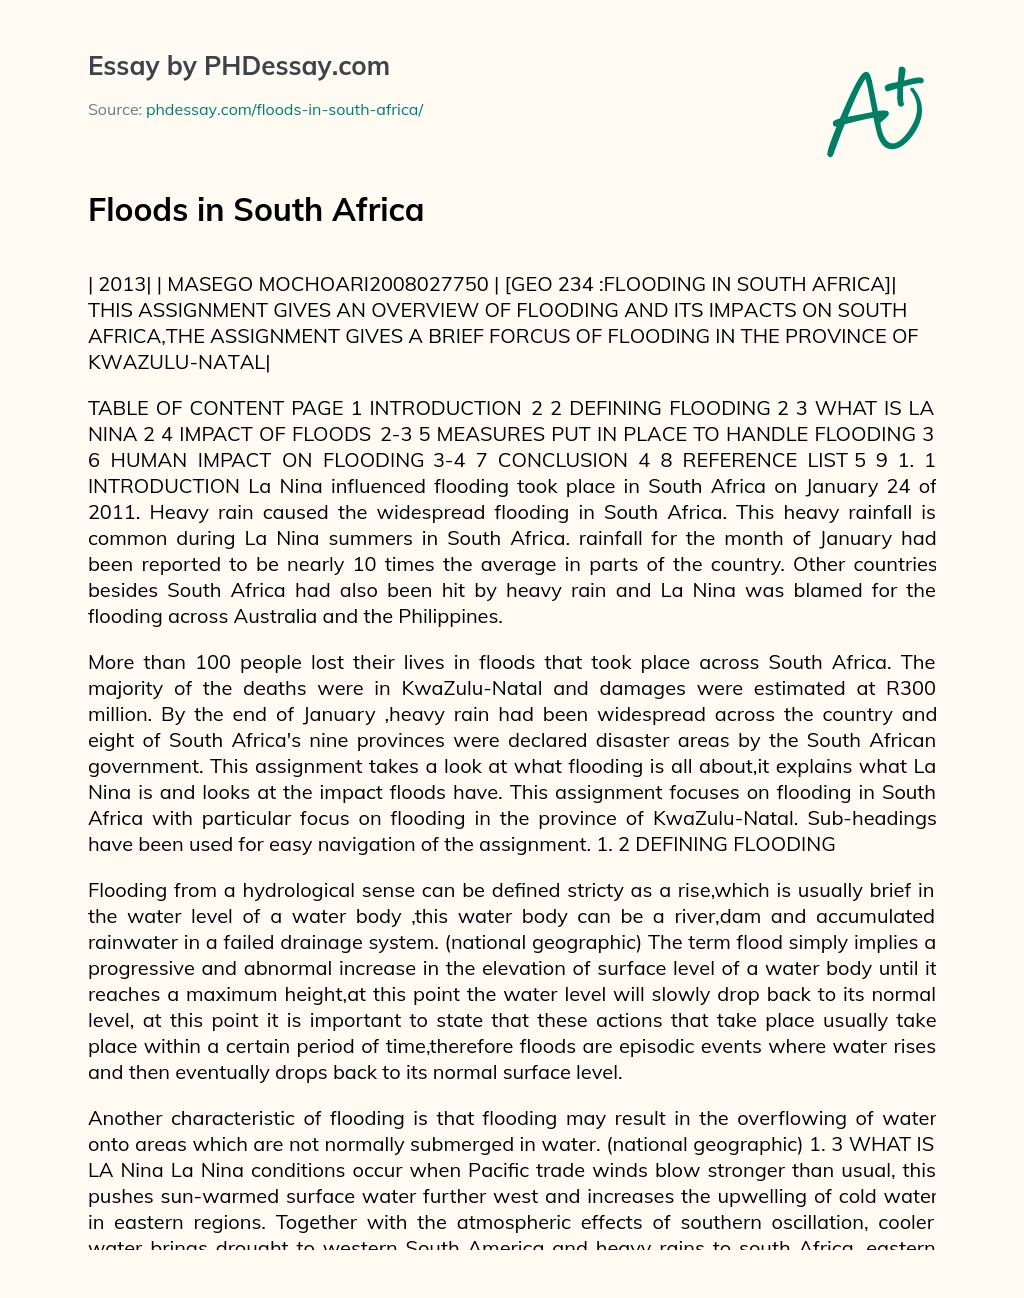 Floods in South Africa essay